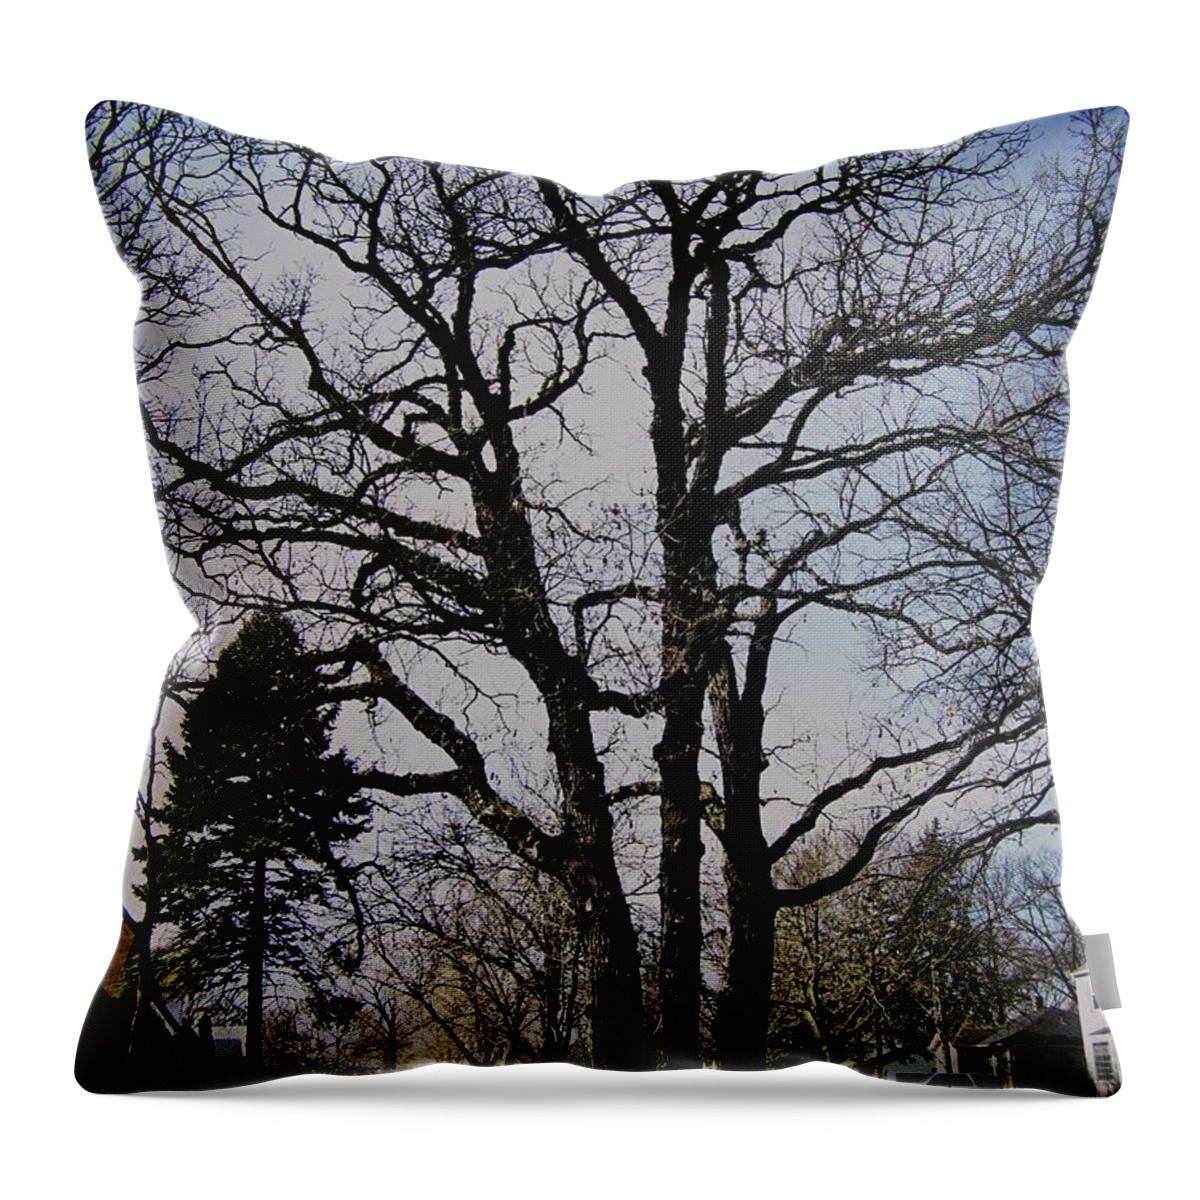 Landscape Throw Pillow featuring the photograph Tree Branches Stretch Into the Sky by Frank J Casella